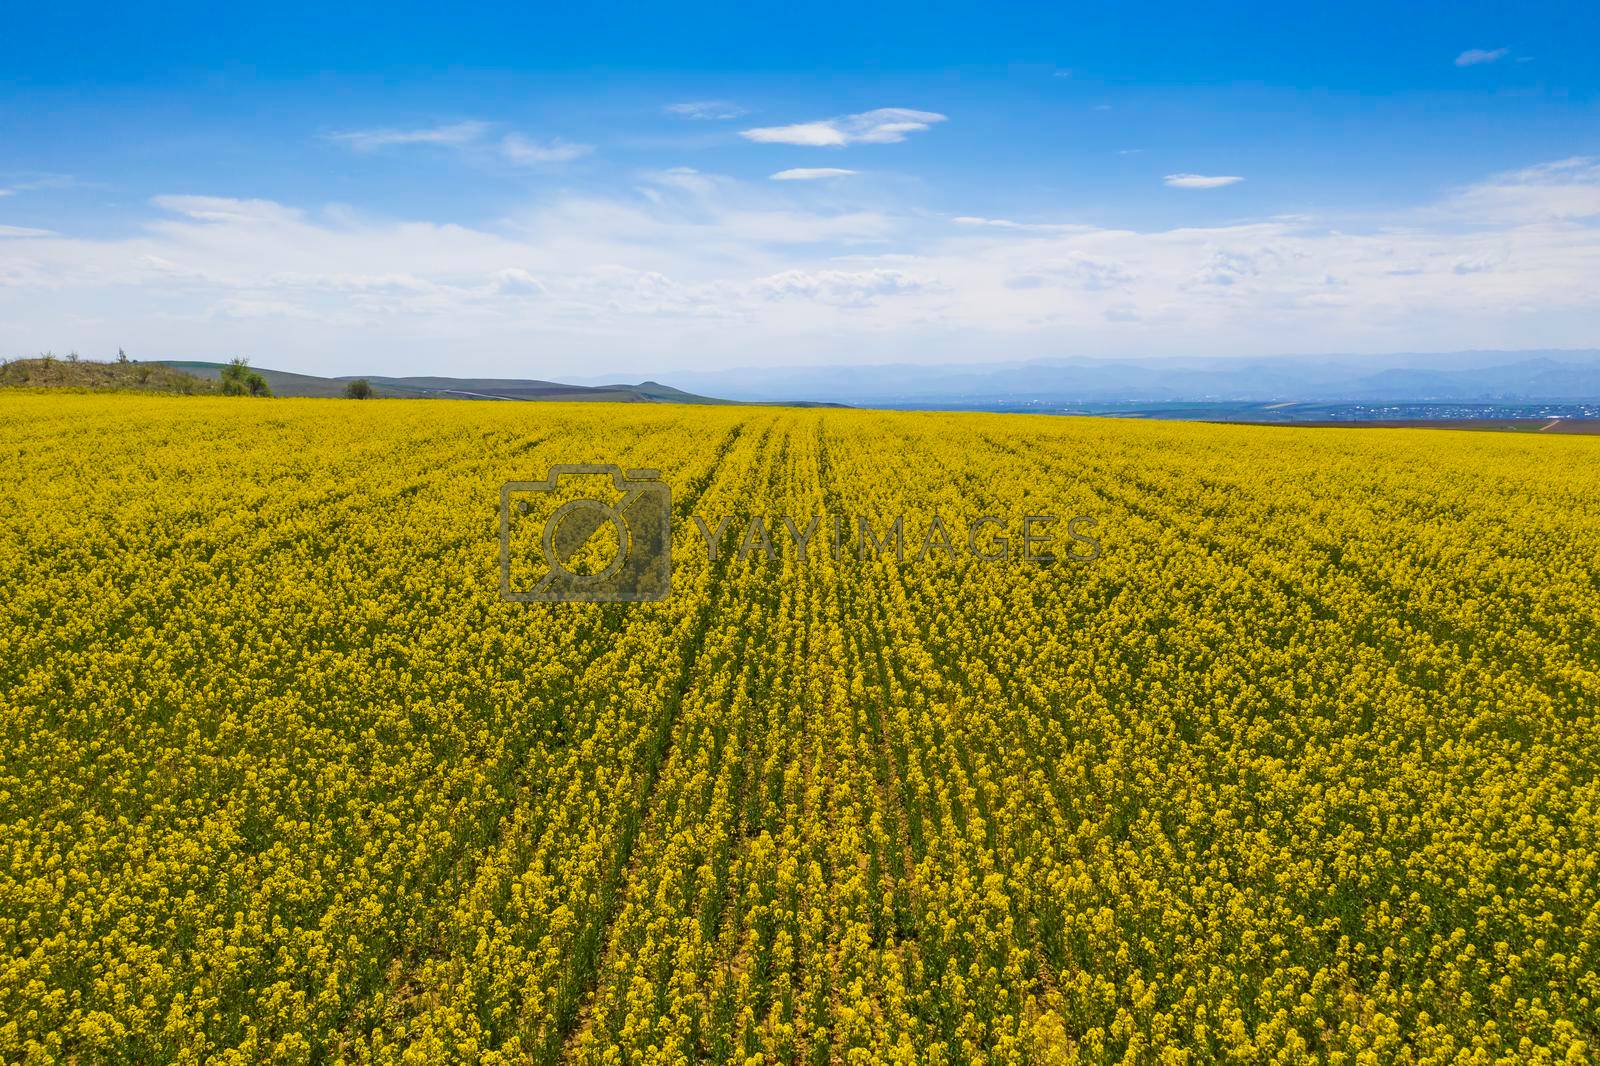 Aerial view of canola field during bloom in a spring landscape